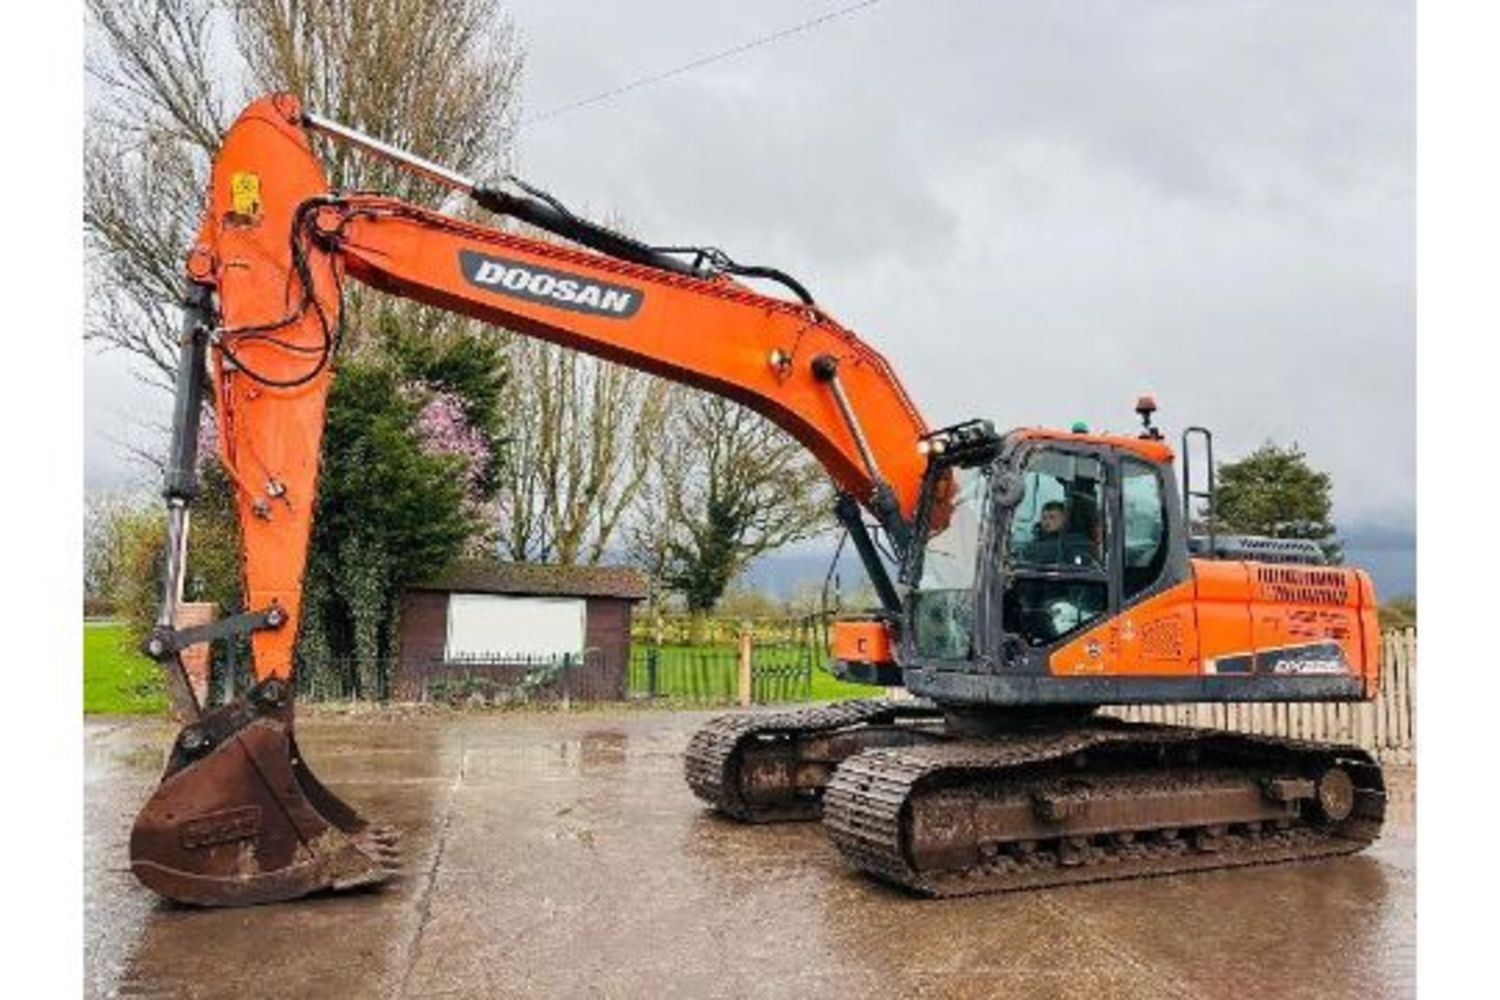 HAND PICKED SELECTION OF PLANT | Including Excavators, Dumpers, Generators, Access Lifts, Rollers & More ending Friday 5th April from 1.30pm